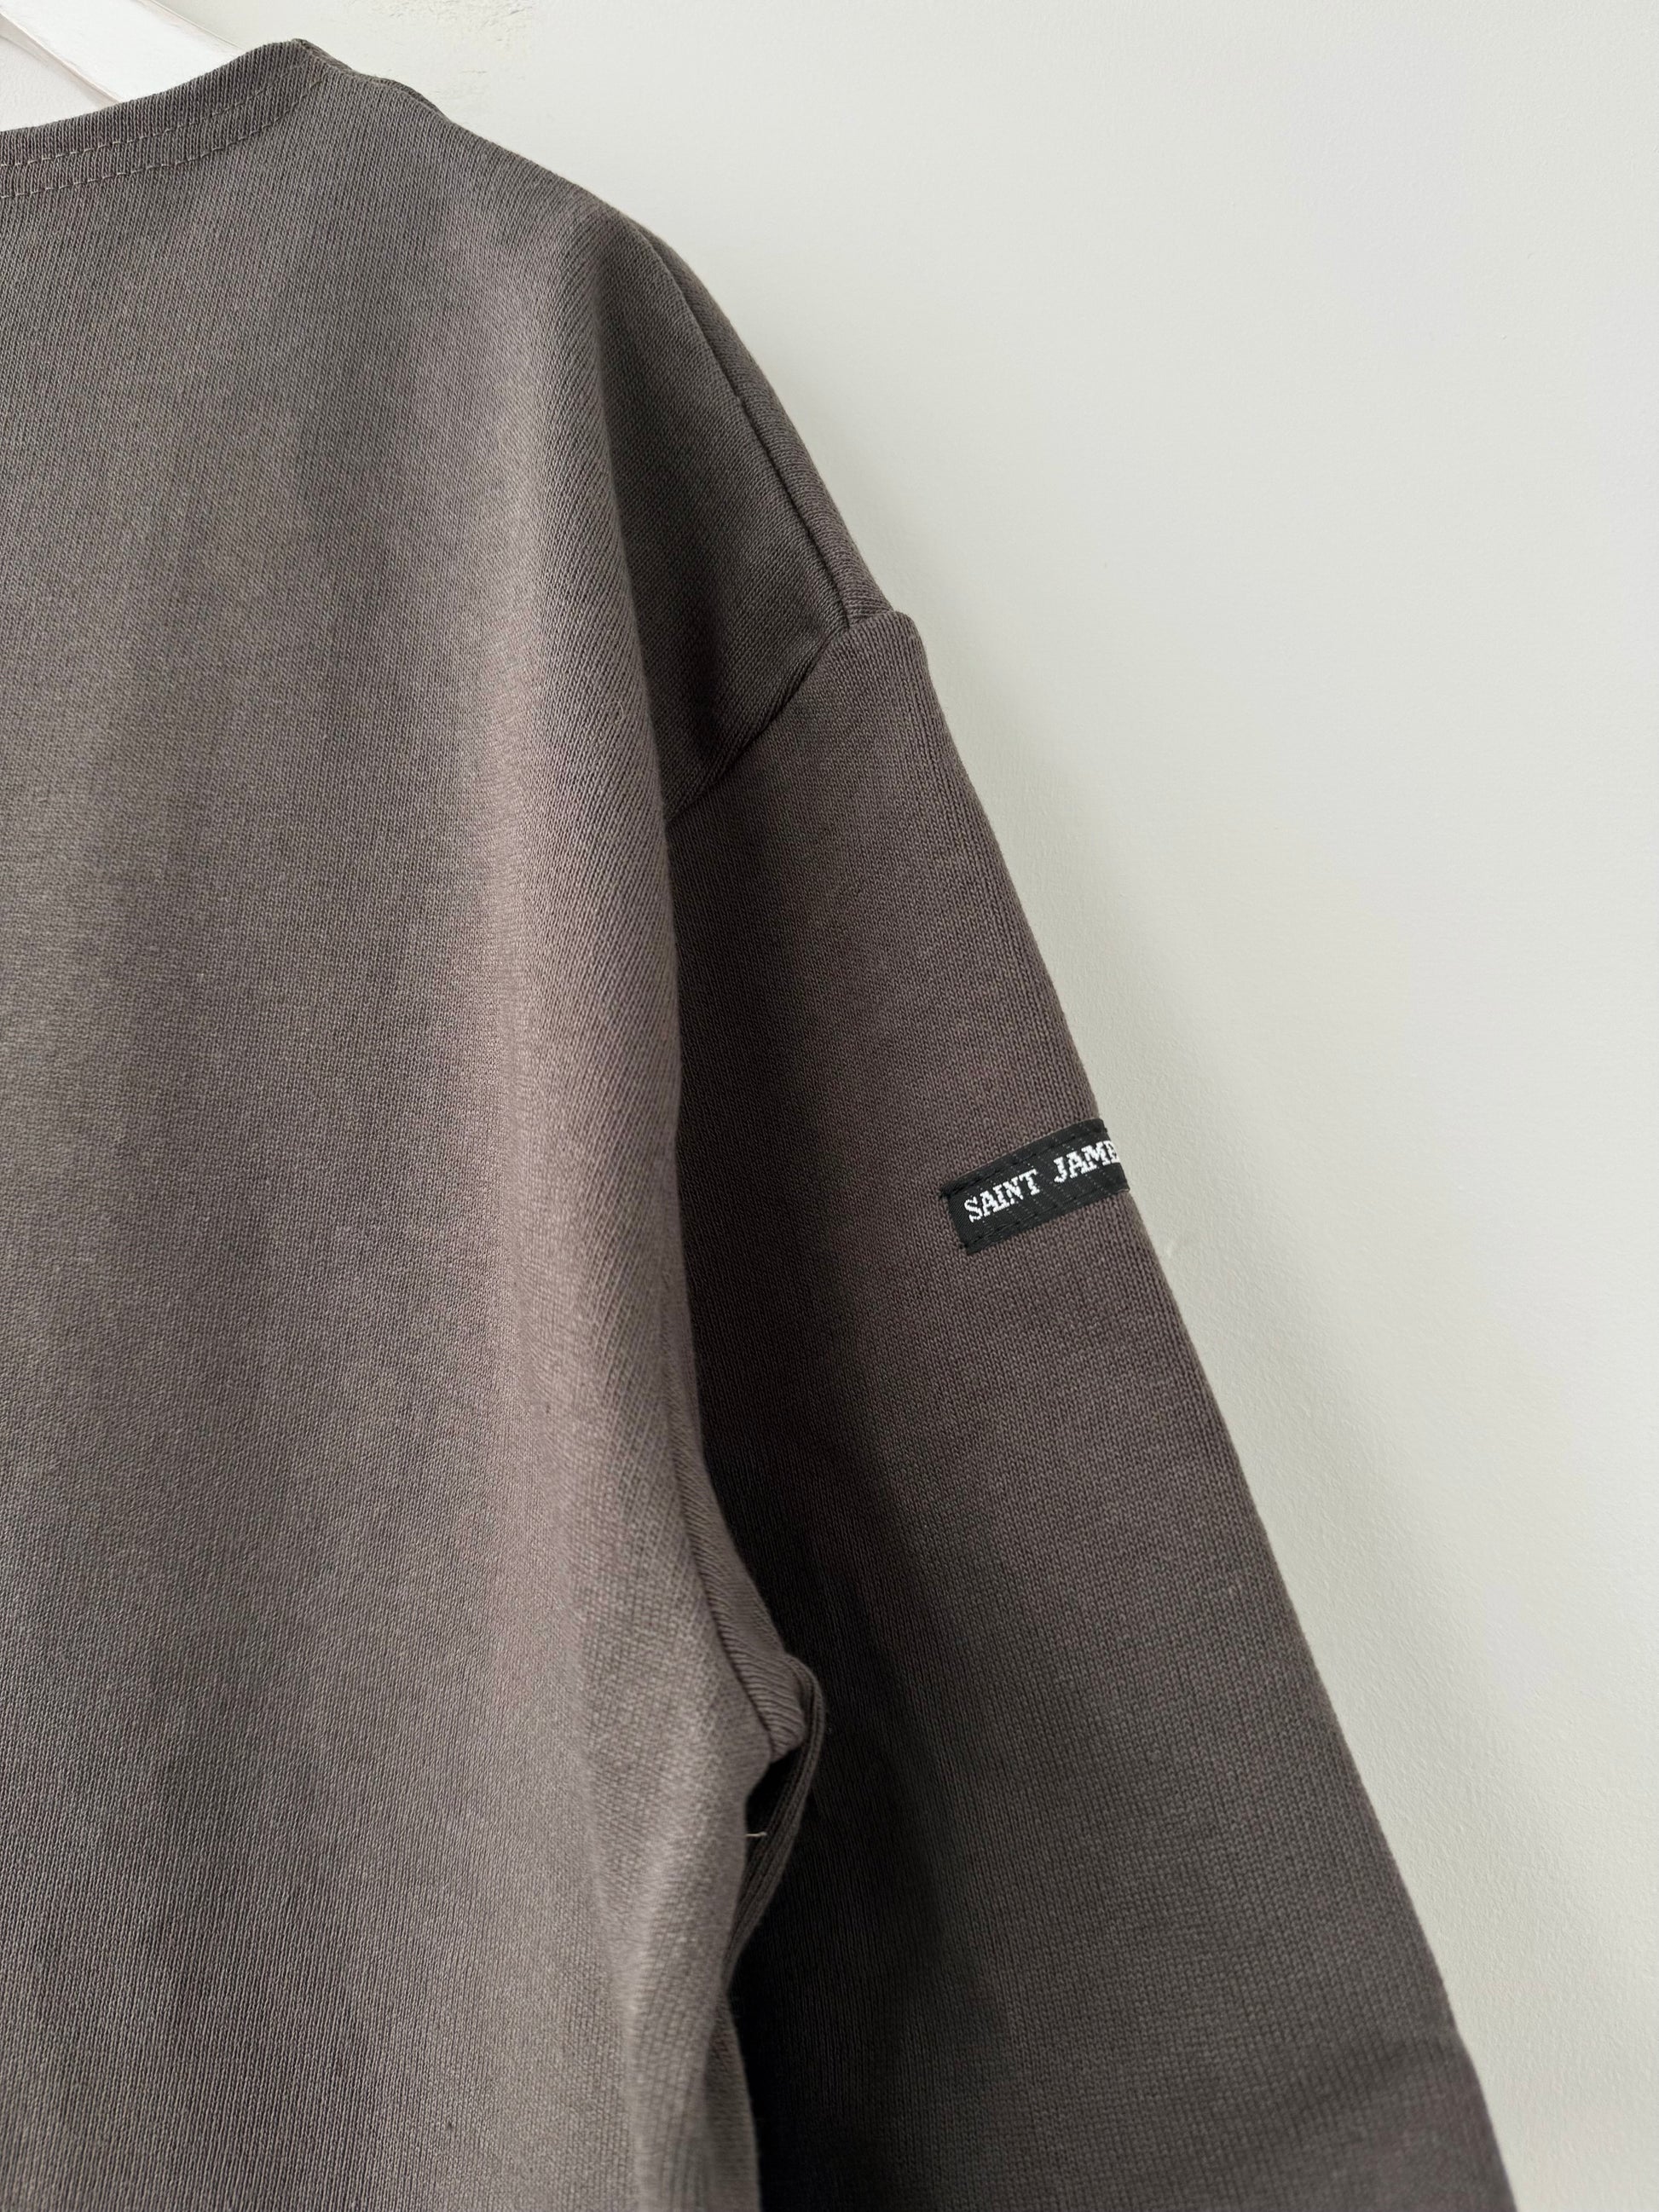 OUESSANT TEE LOOSE (TAUPE)　SAINT JAMES セントジェームス　通販　取扱店